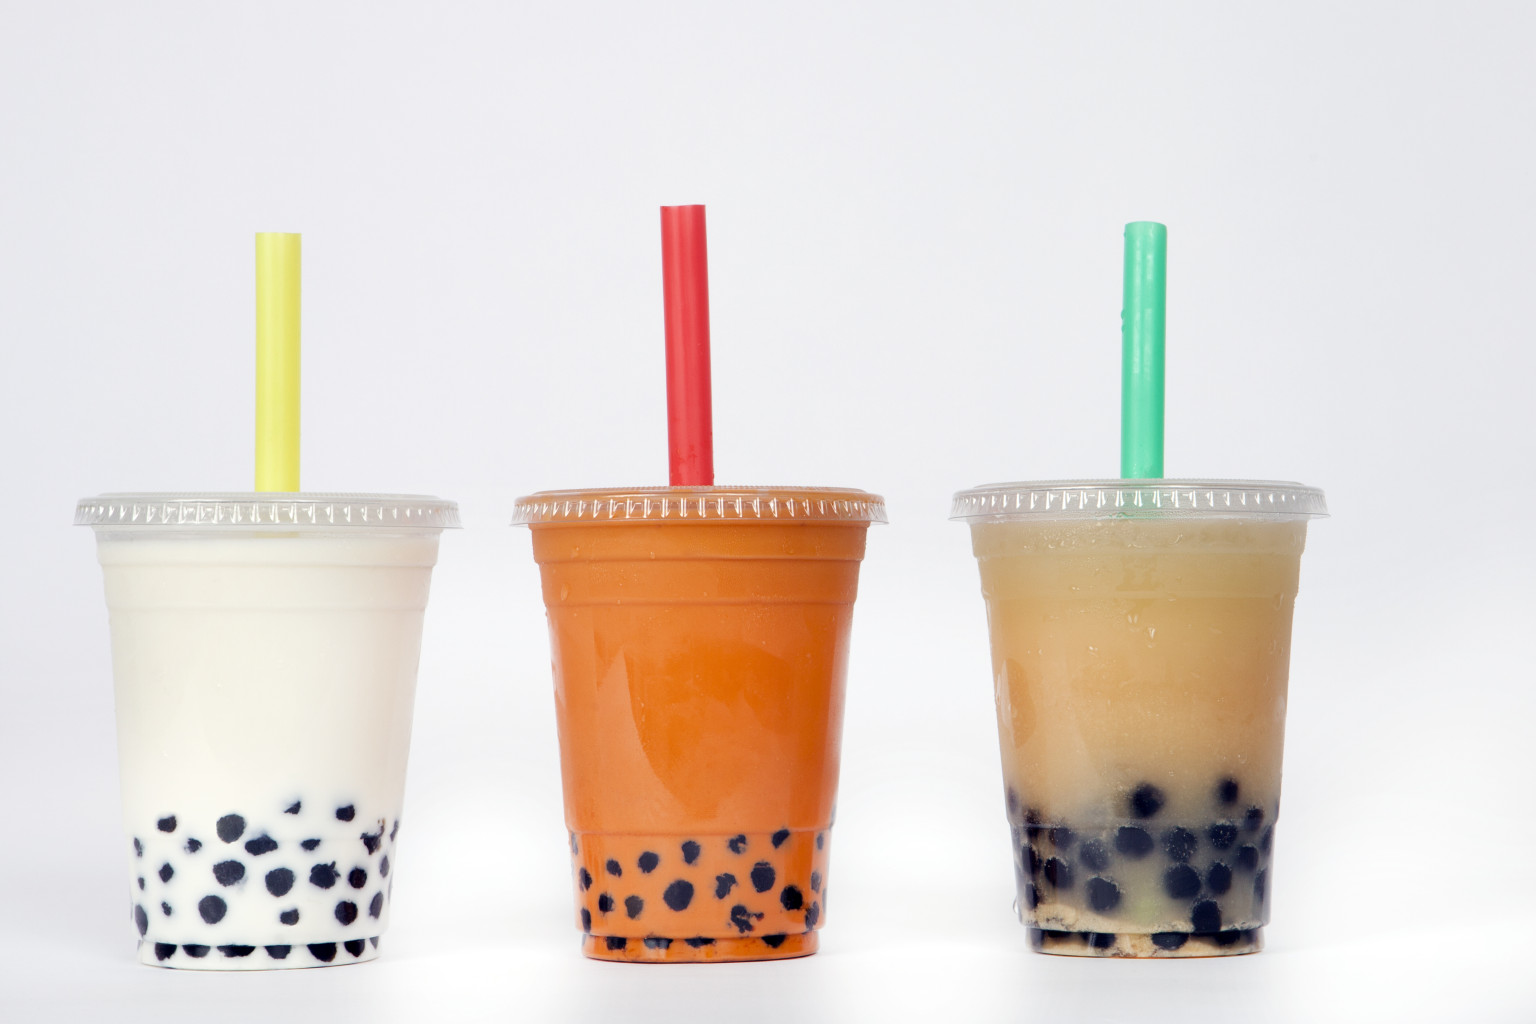 A Definitive Ranking of the Best Boba in Davis